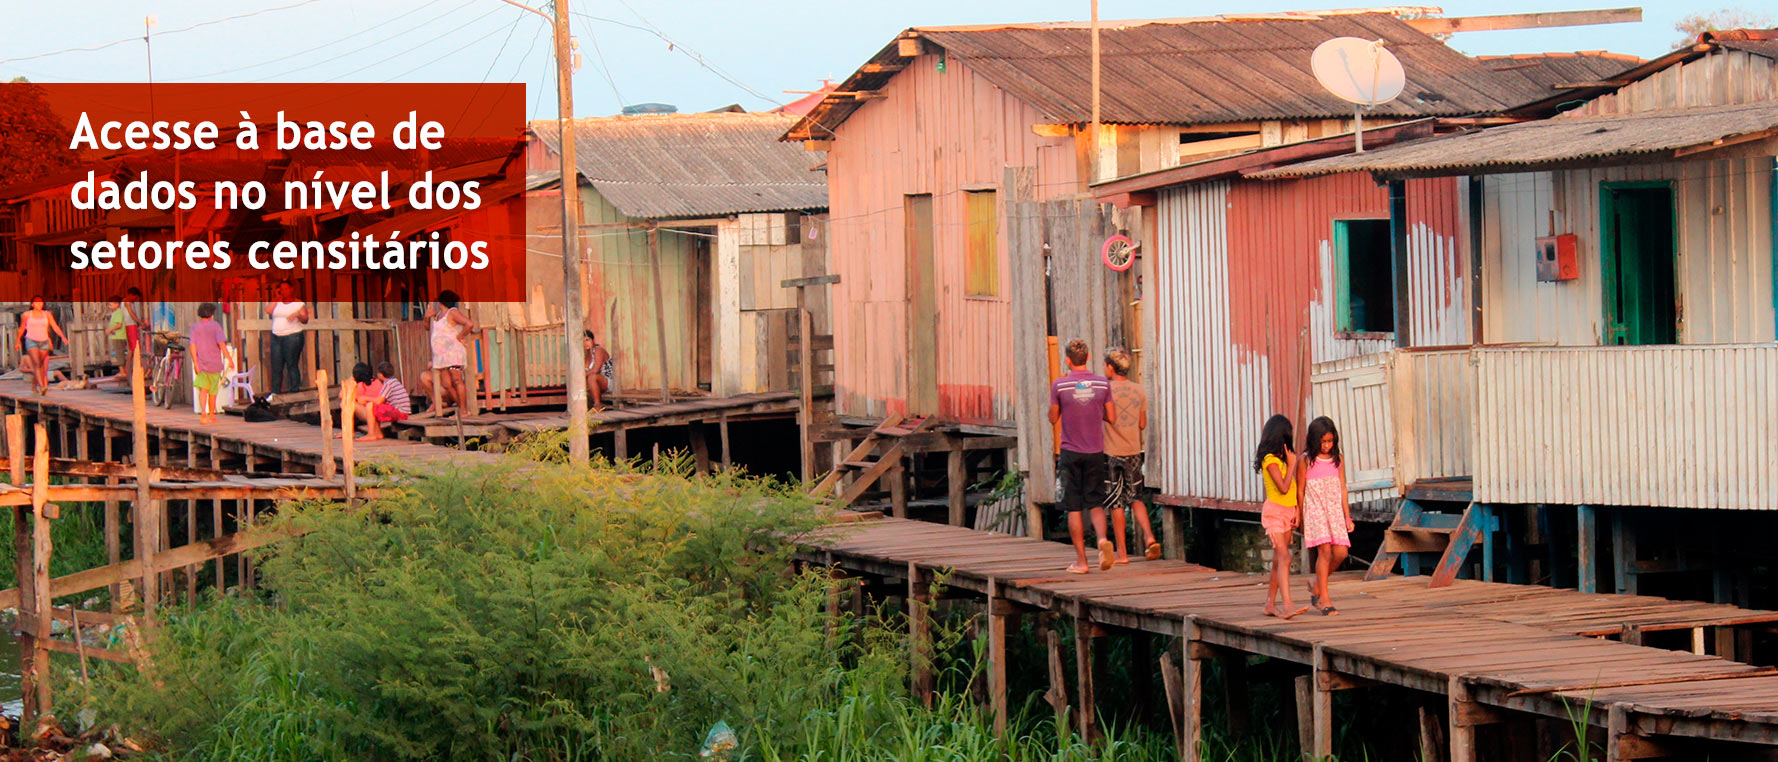 Two children walk on an elevated wooden boardwalk in front of buildings constructed from wood and corrugated metal